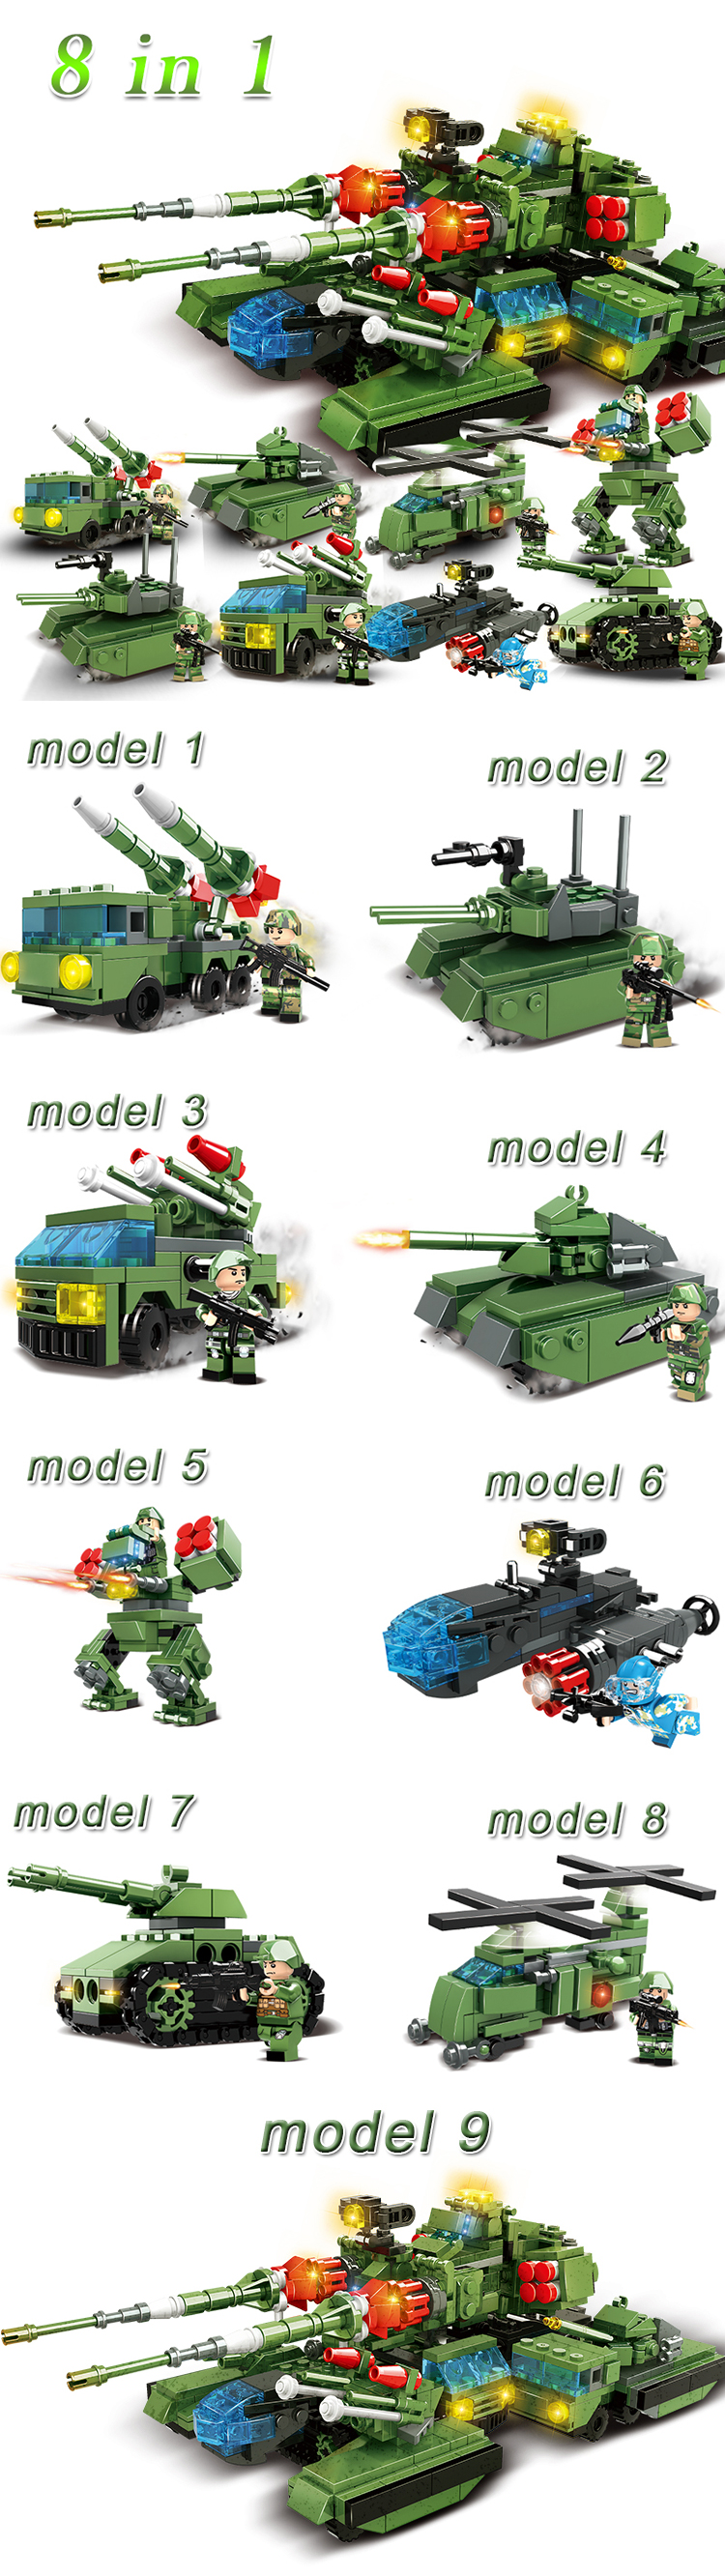 WOMA TOYS 933Pcs Bricks 8 In 1 Small Building Block Figure Military War Tank Construction Toy Model Diy